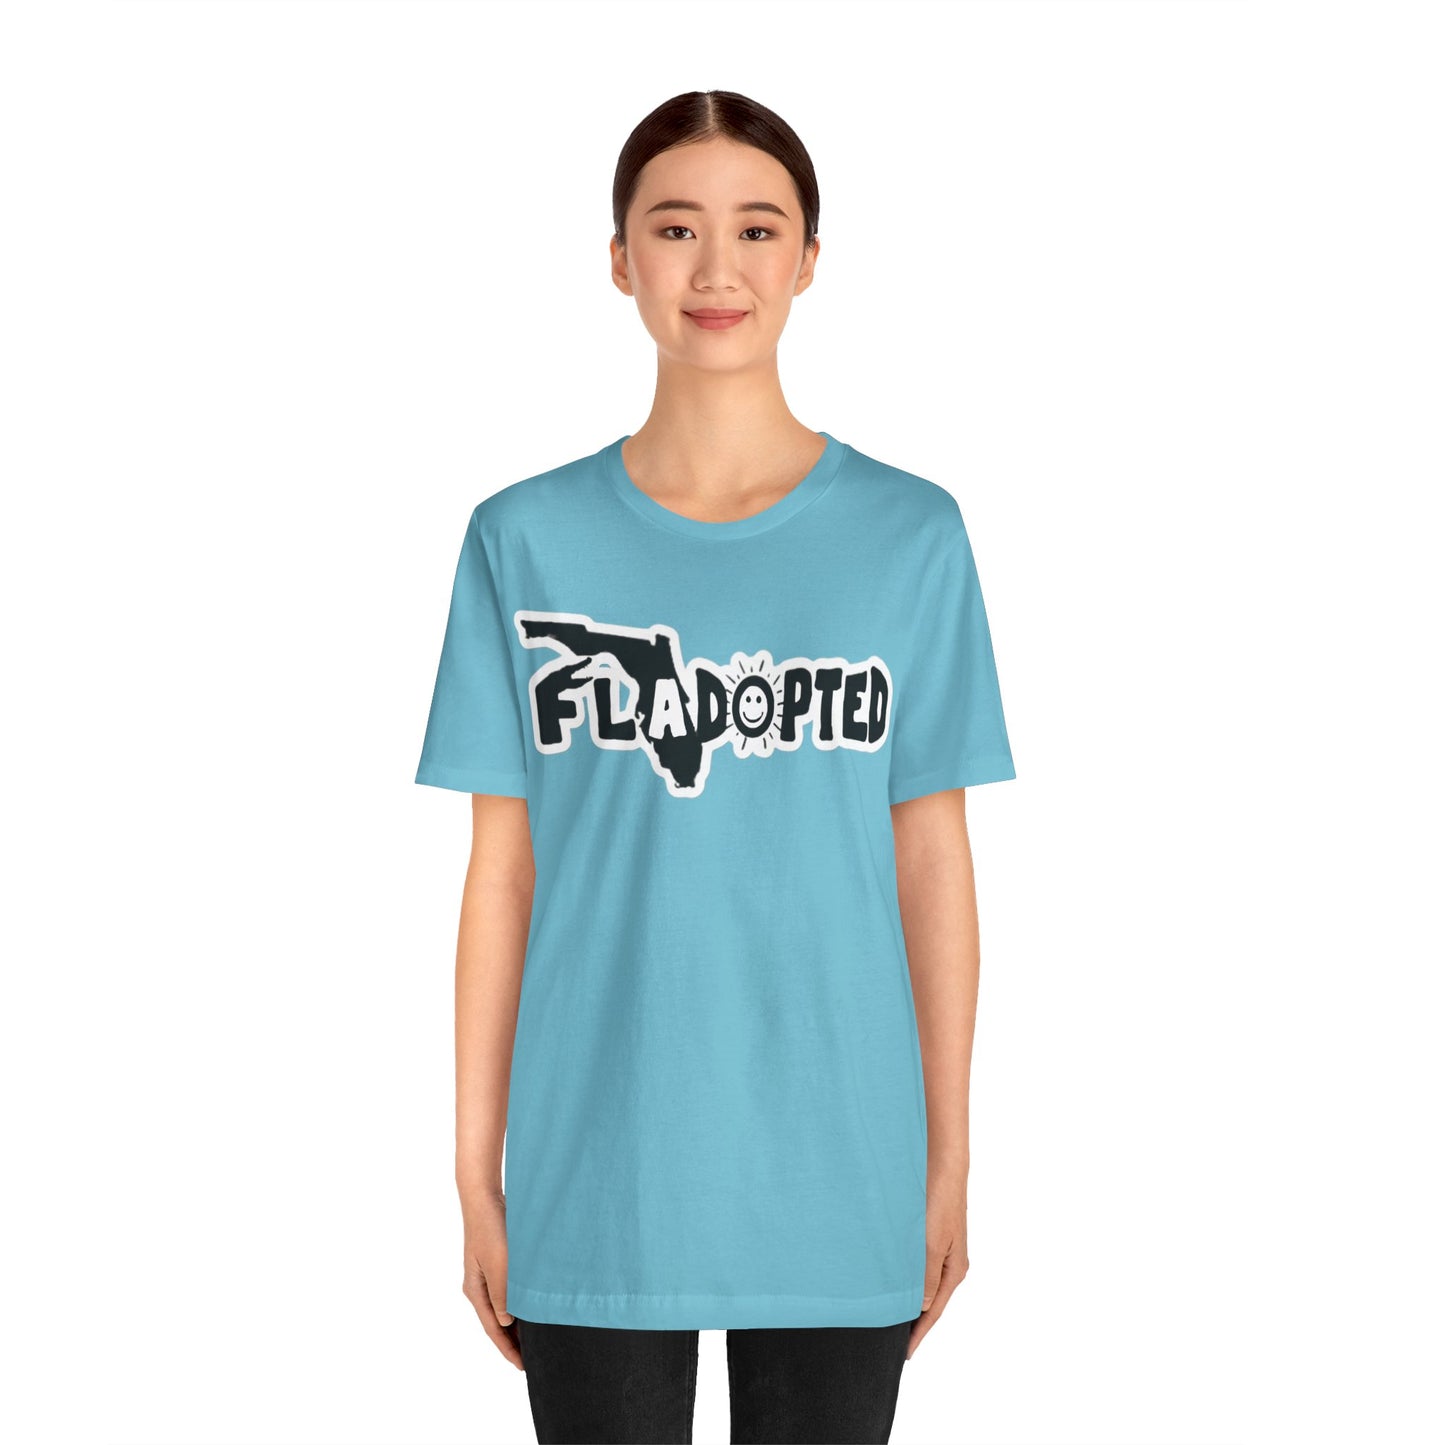 Fladopted Unisex Jersey Short Sleeve Tee